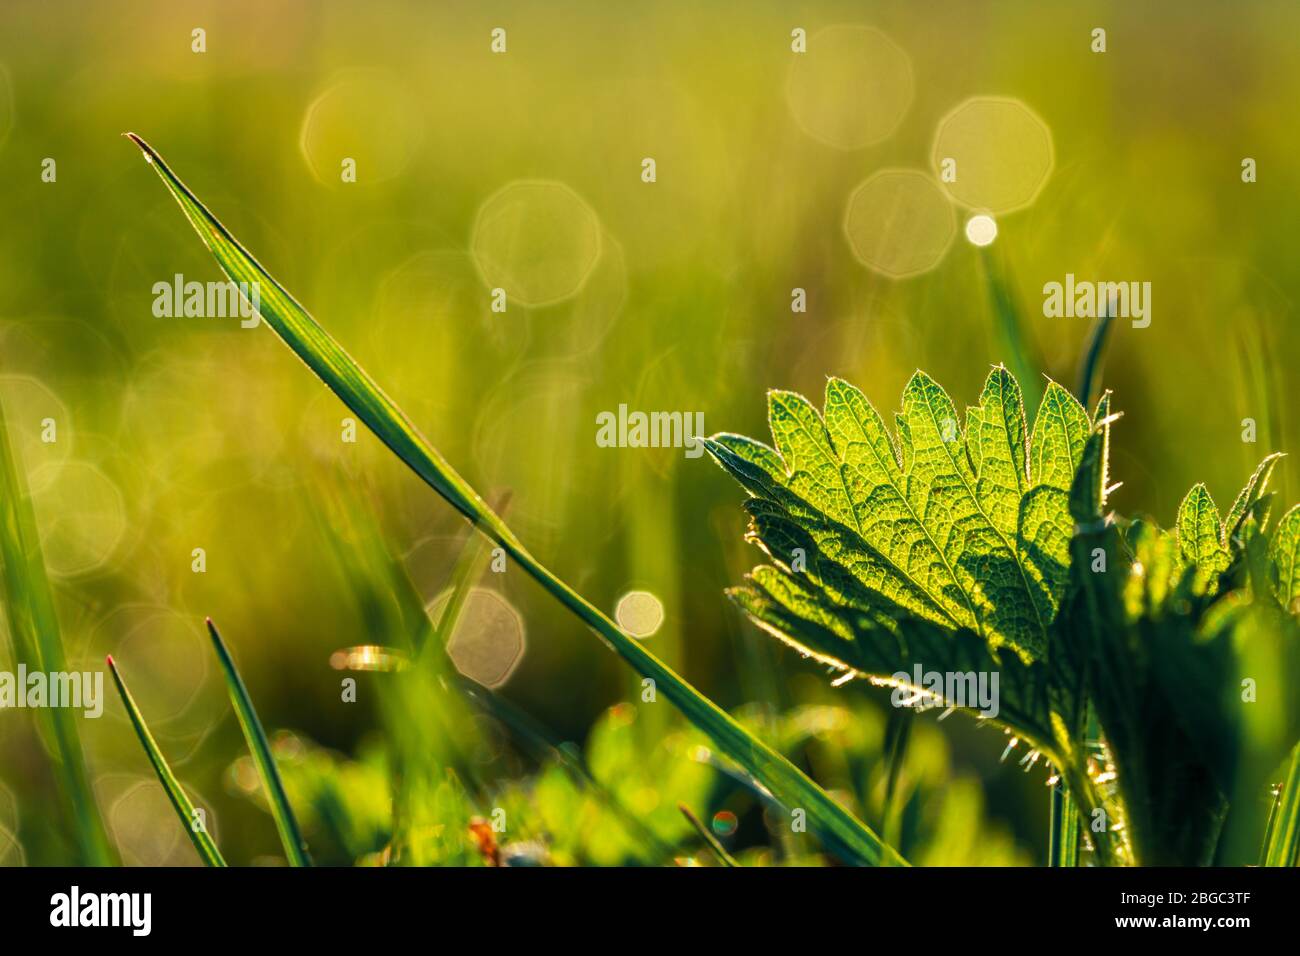 Leaf of stinging nettle and blade of grass on lush meadow backlit by bright warm light of sunrise. Concept of purity, freshness, naturopathy, nature Stock Photo